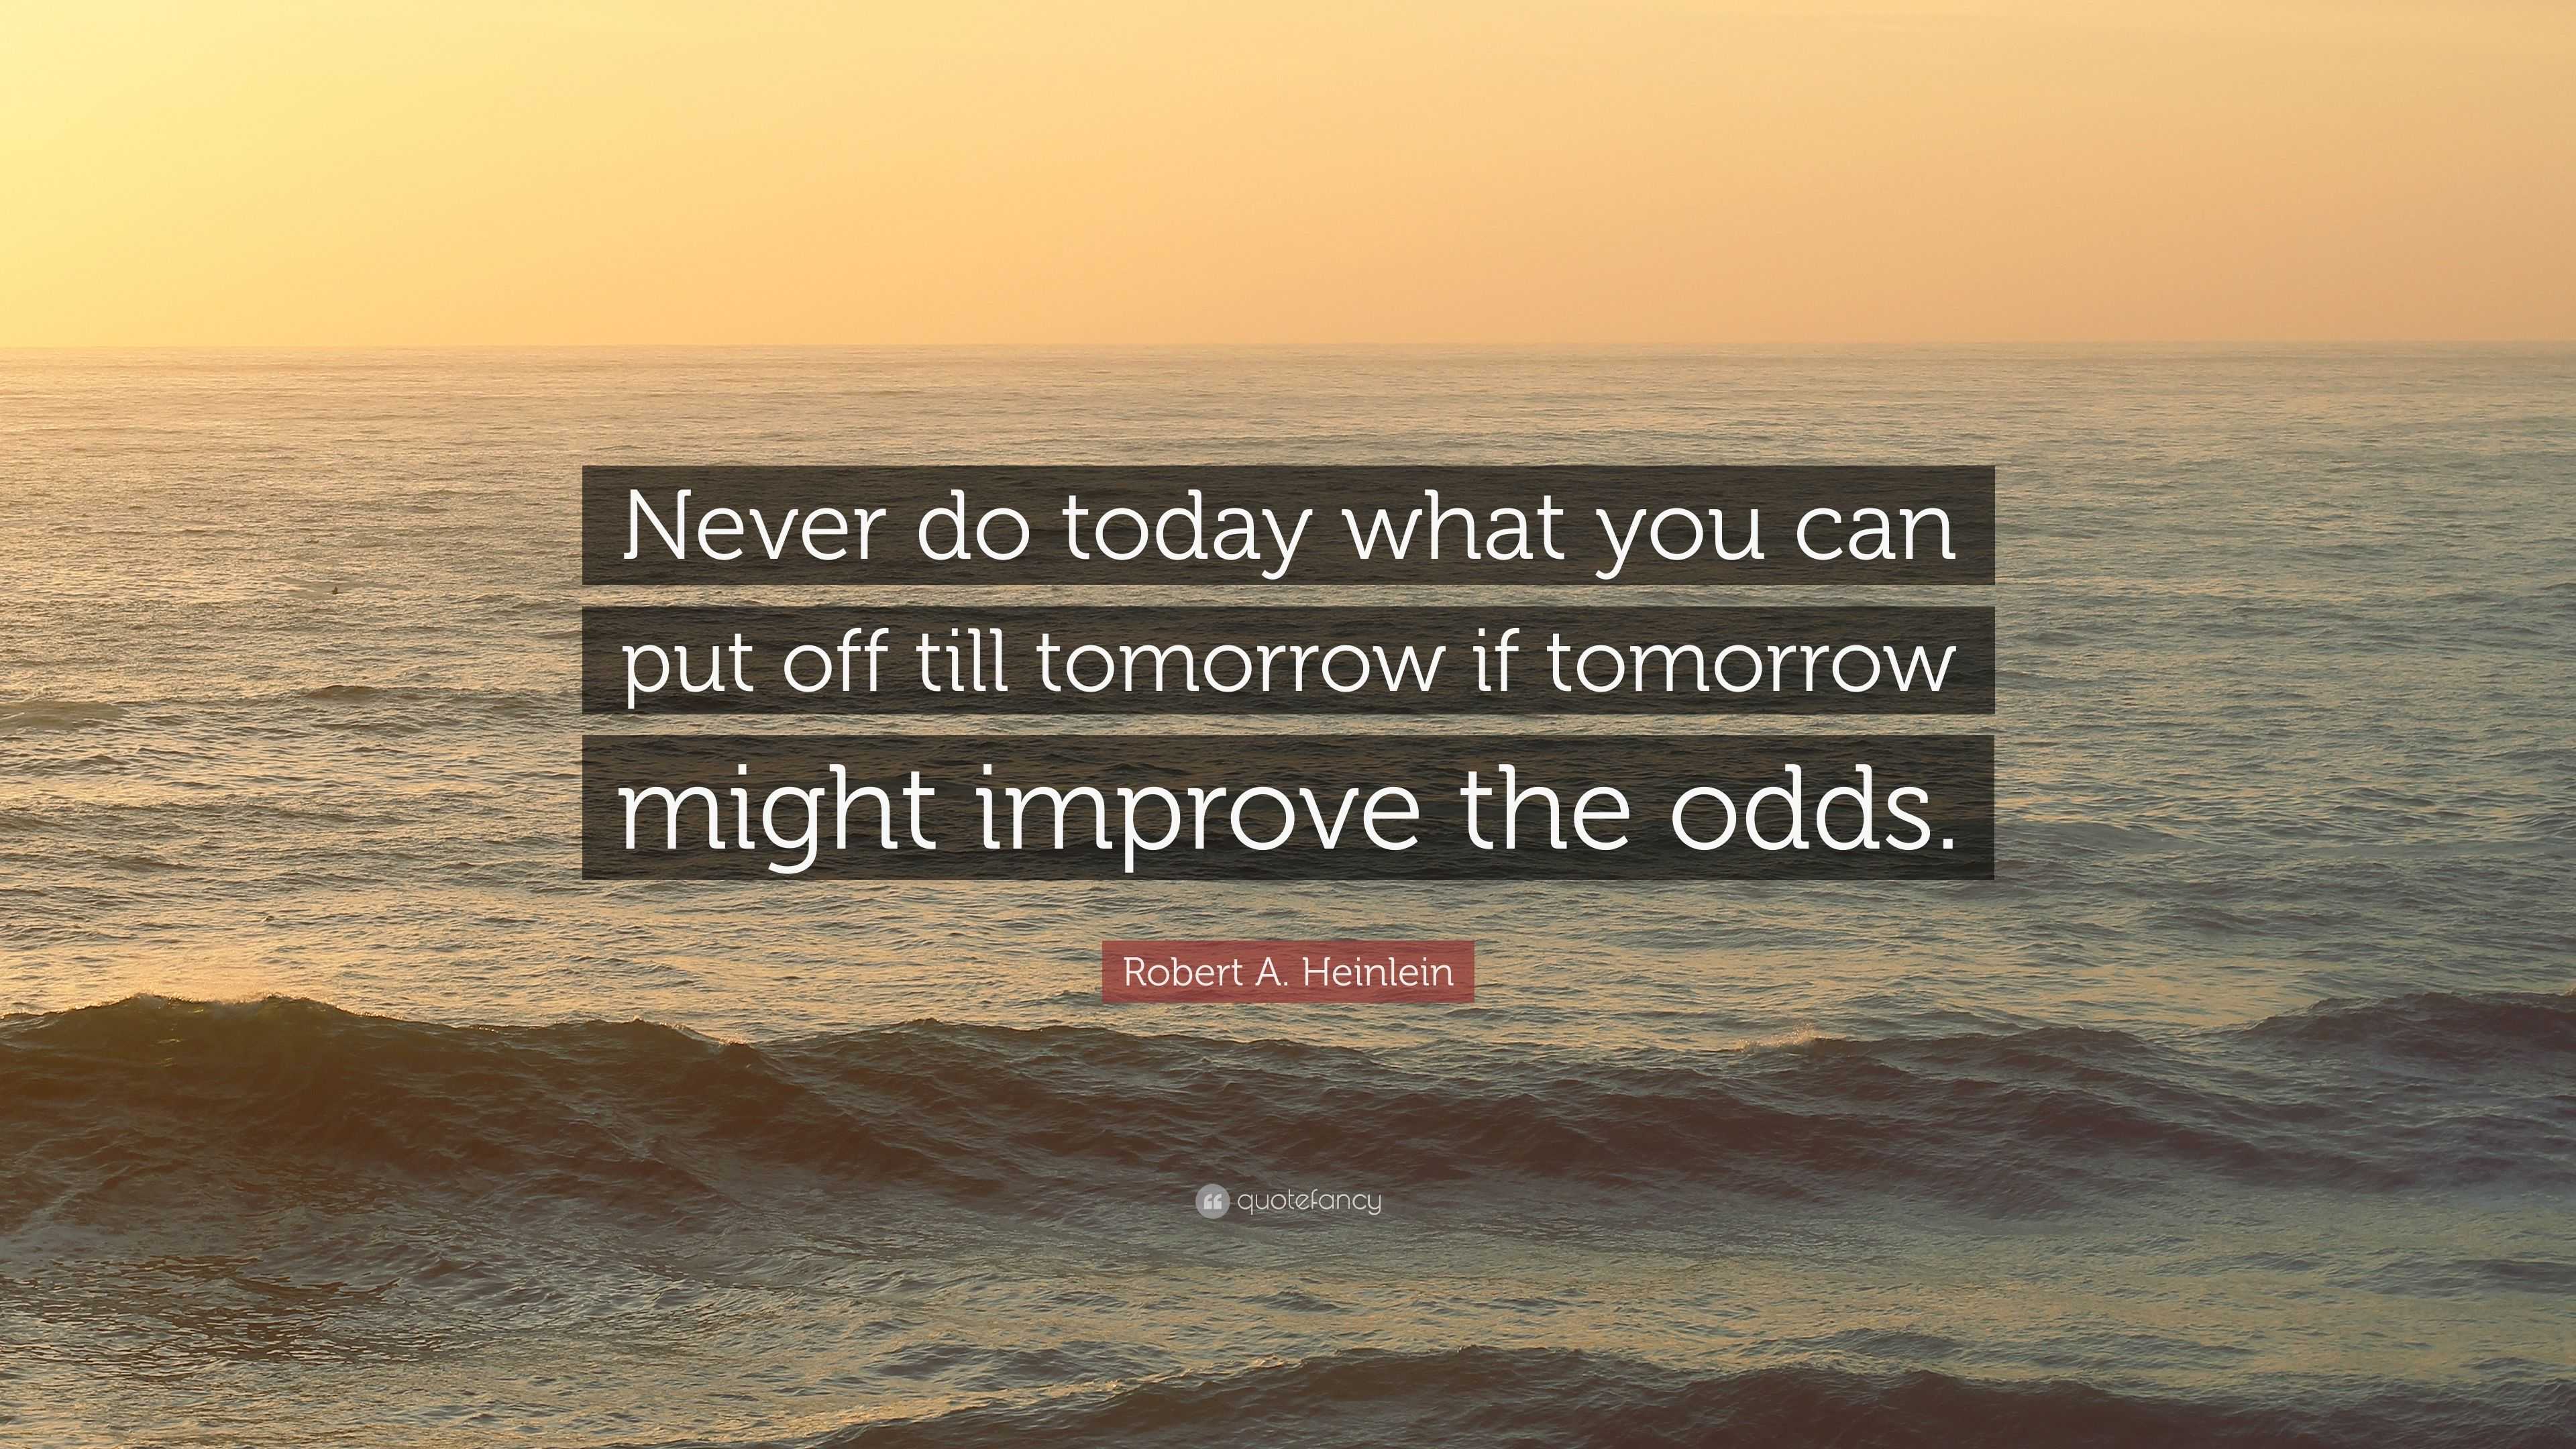 Robert A Heinlein Quote: Never do today what you can put off till